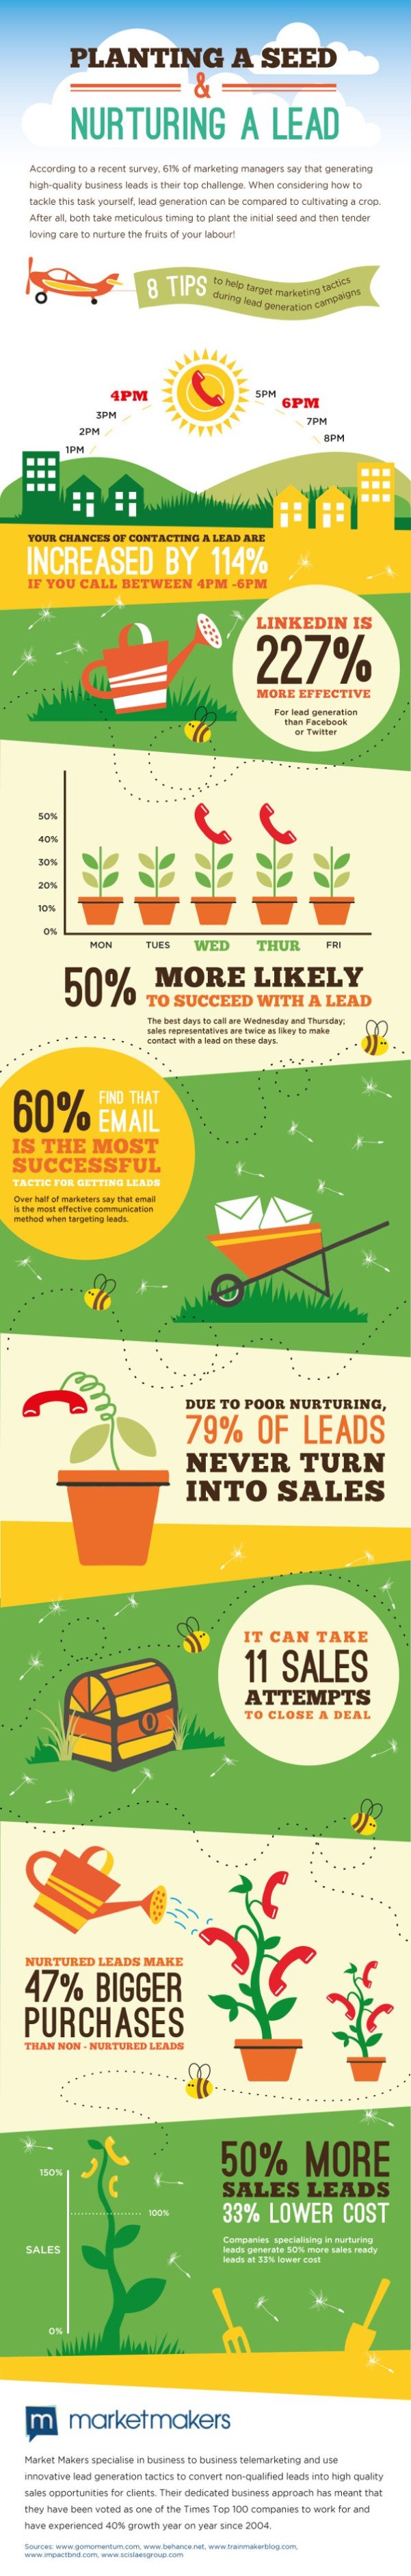 Planting a seed and nurturing a lead infographic